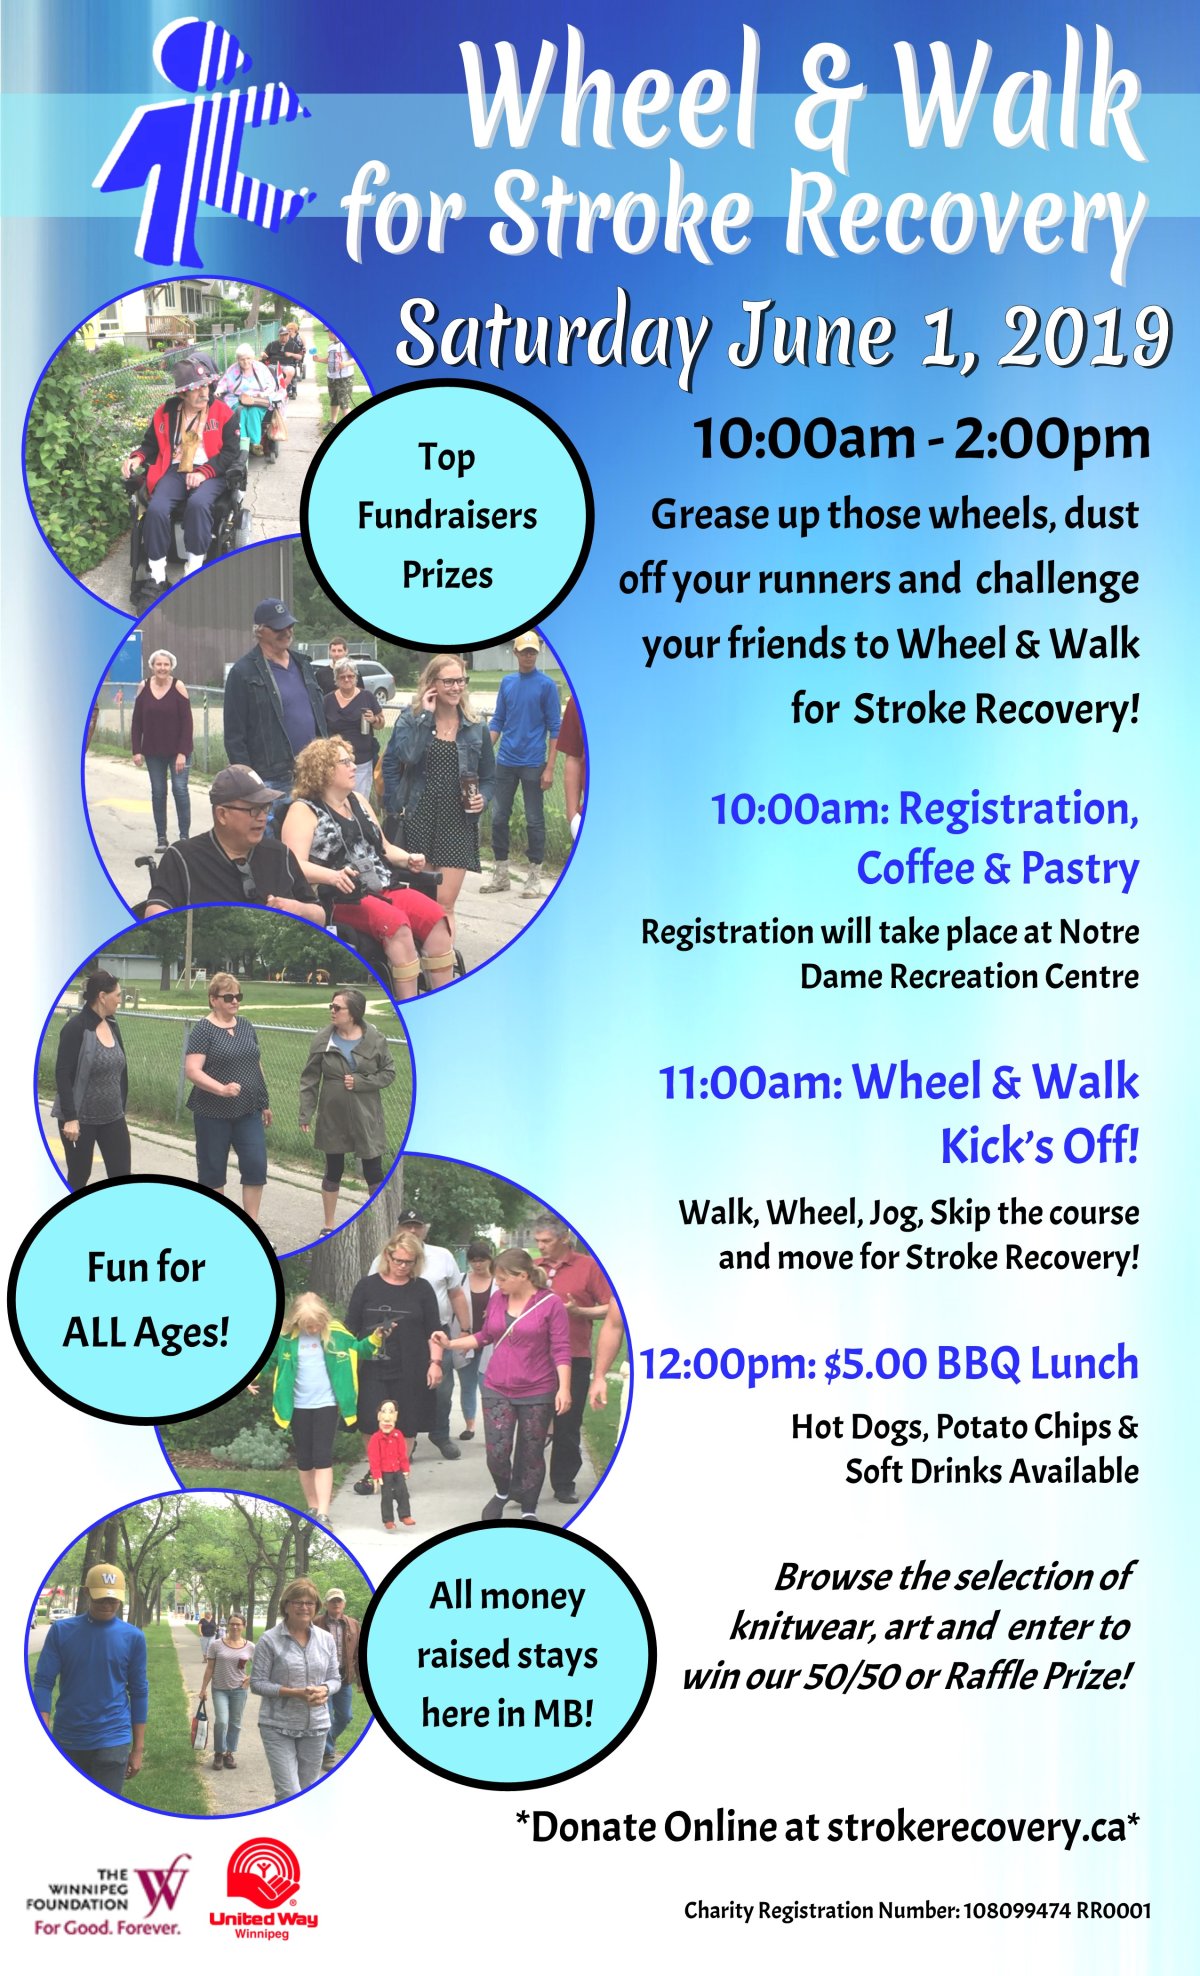 Wheel & Walk for Stroke Recovery - image